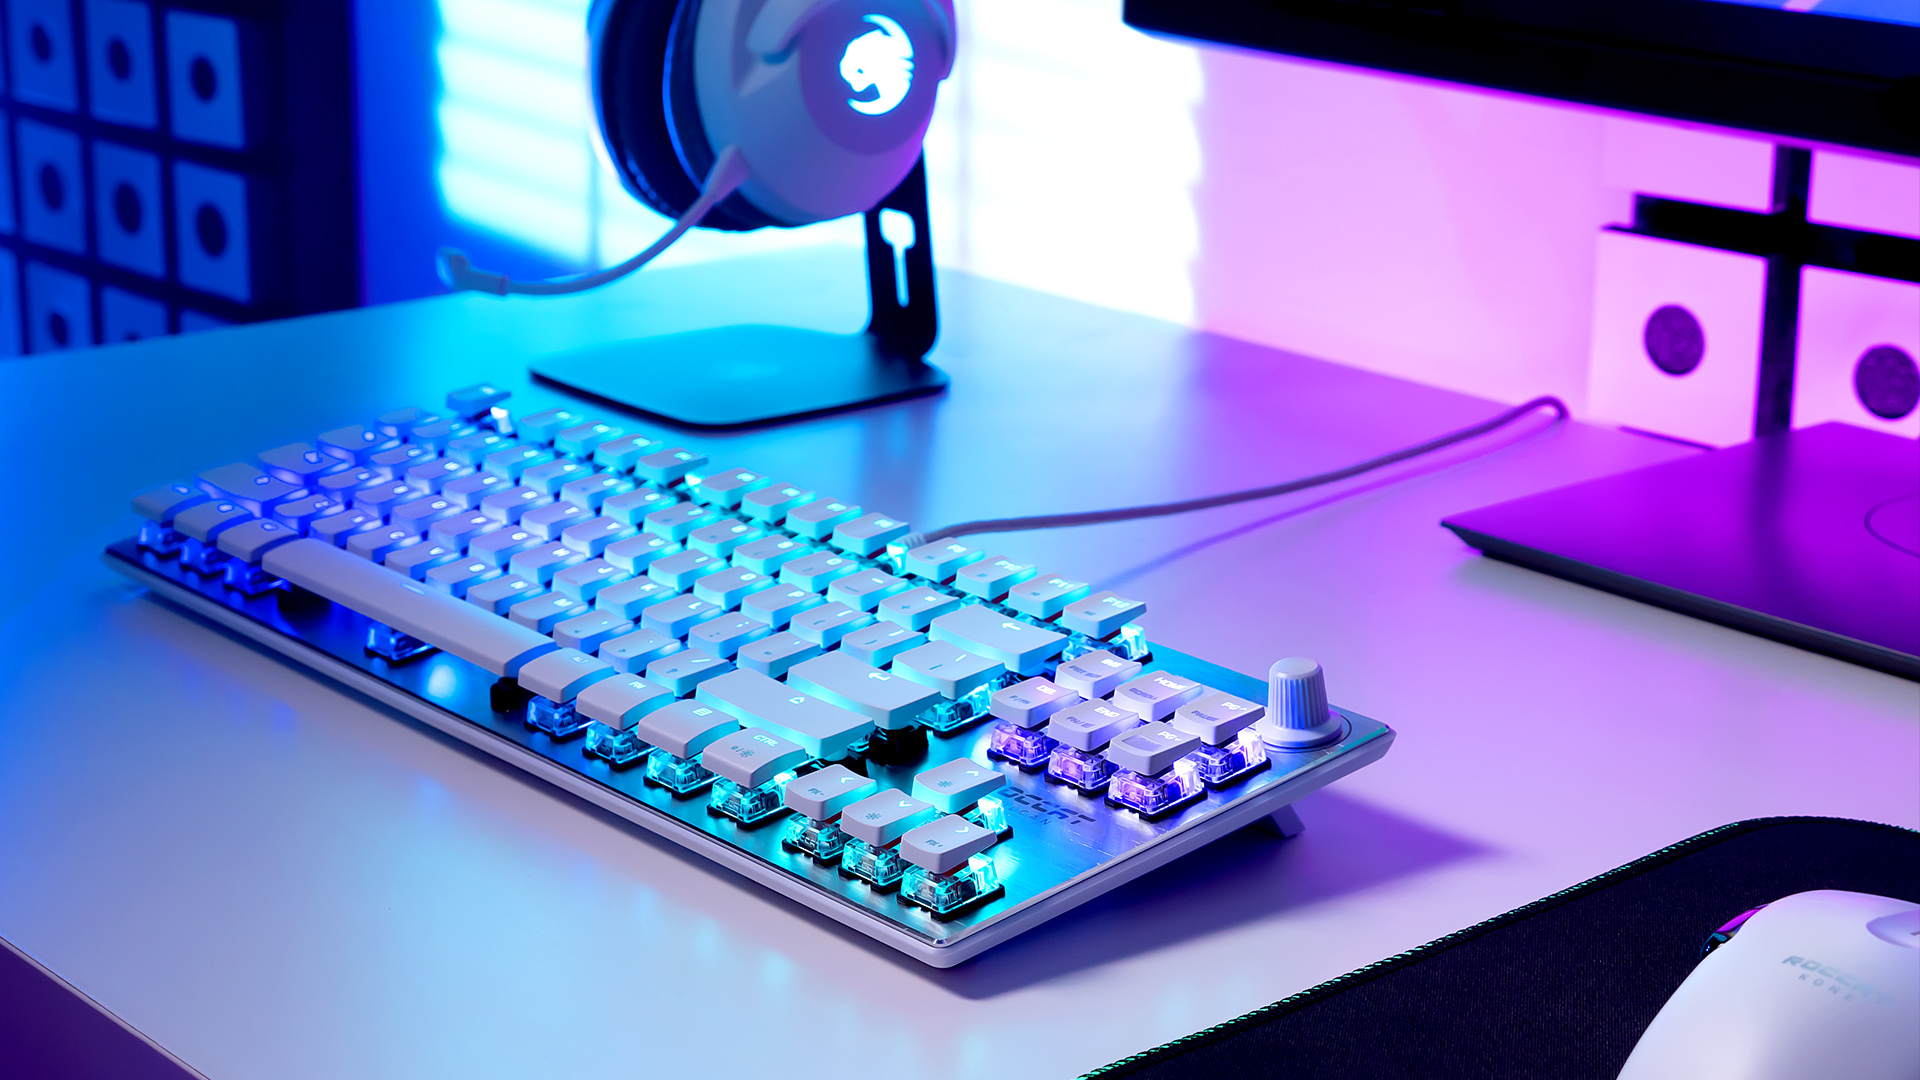 Roccat’s Award-Winning Vulcan TKL Pro PC Gaming Keyboard Is Now Available in Arctic White